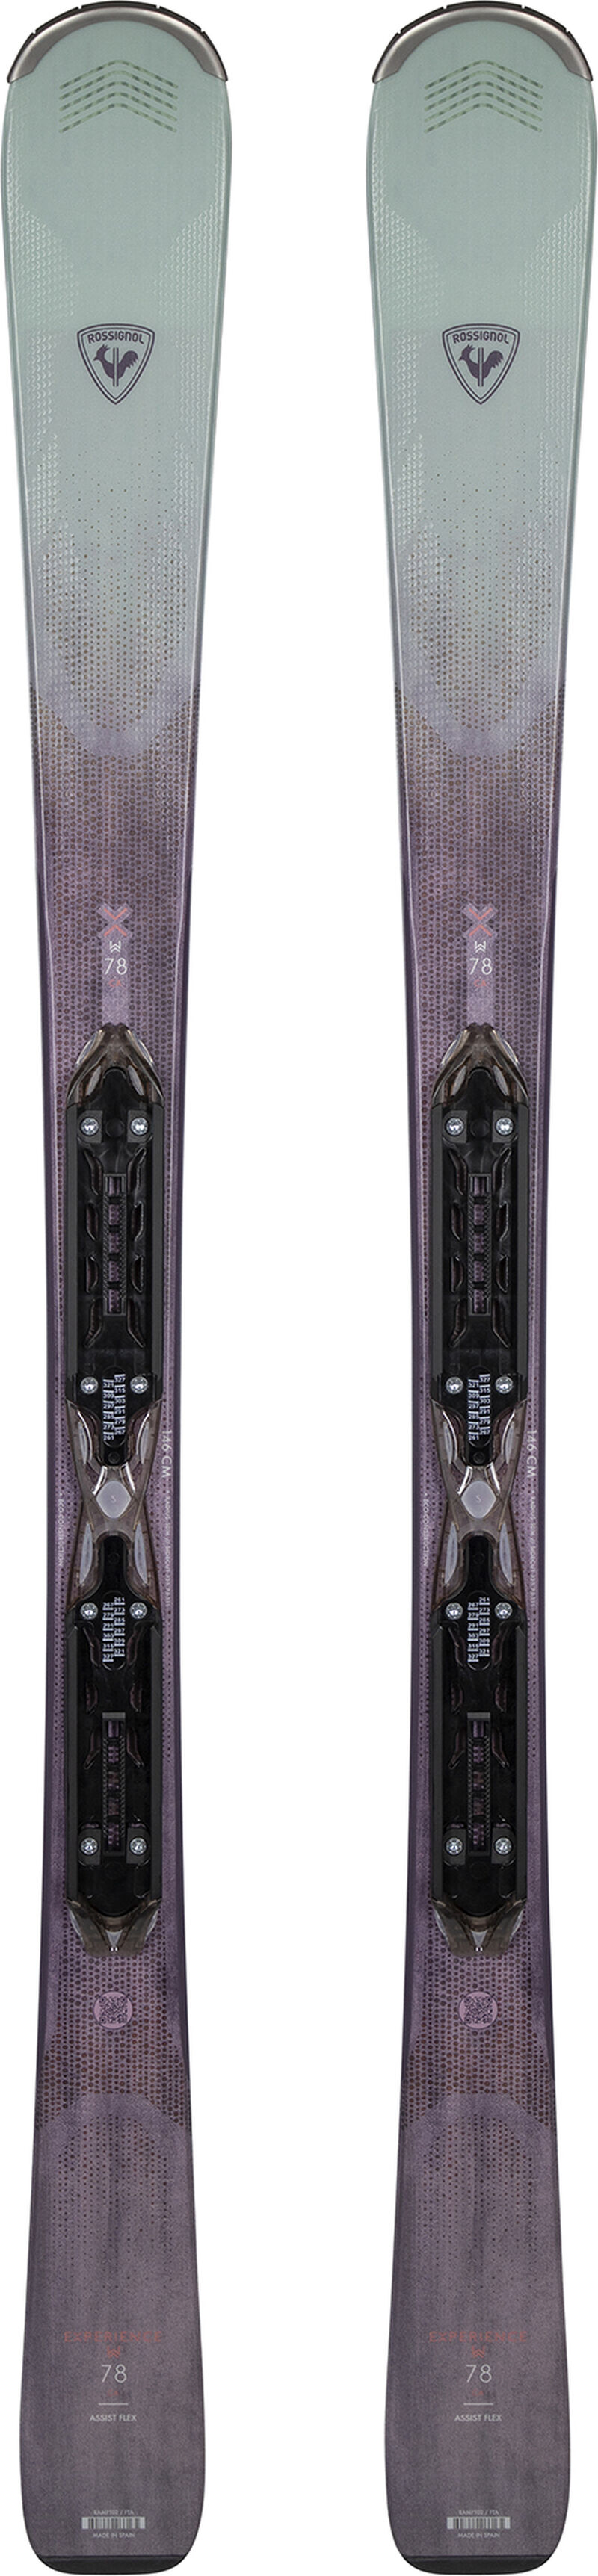 Skis All Mountain femme EXPERIENCE W 78 CARBON (XPRESS)